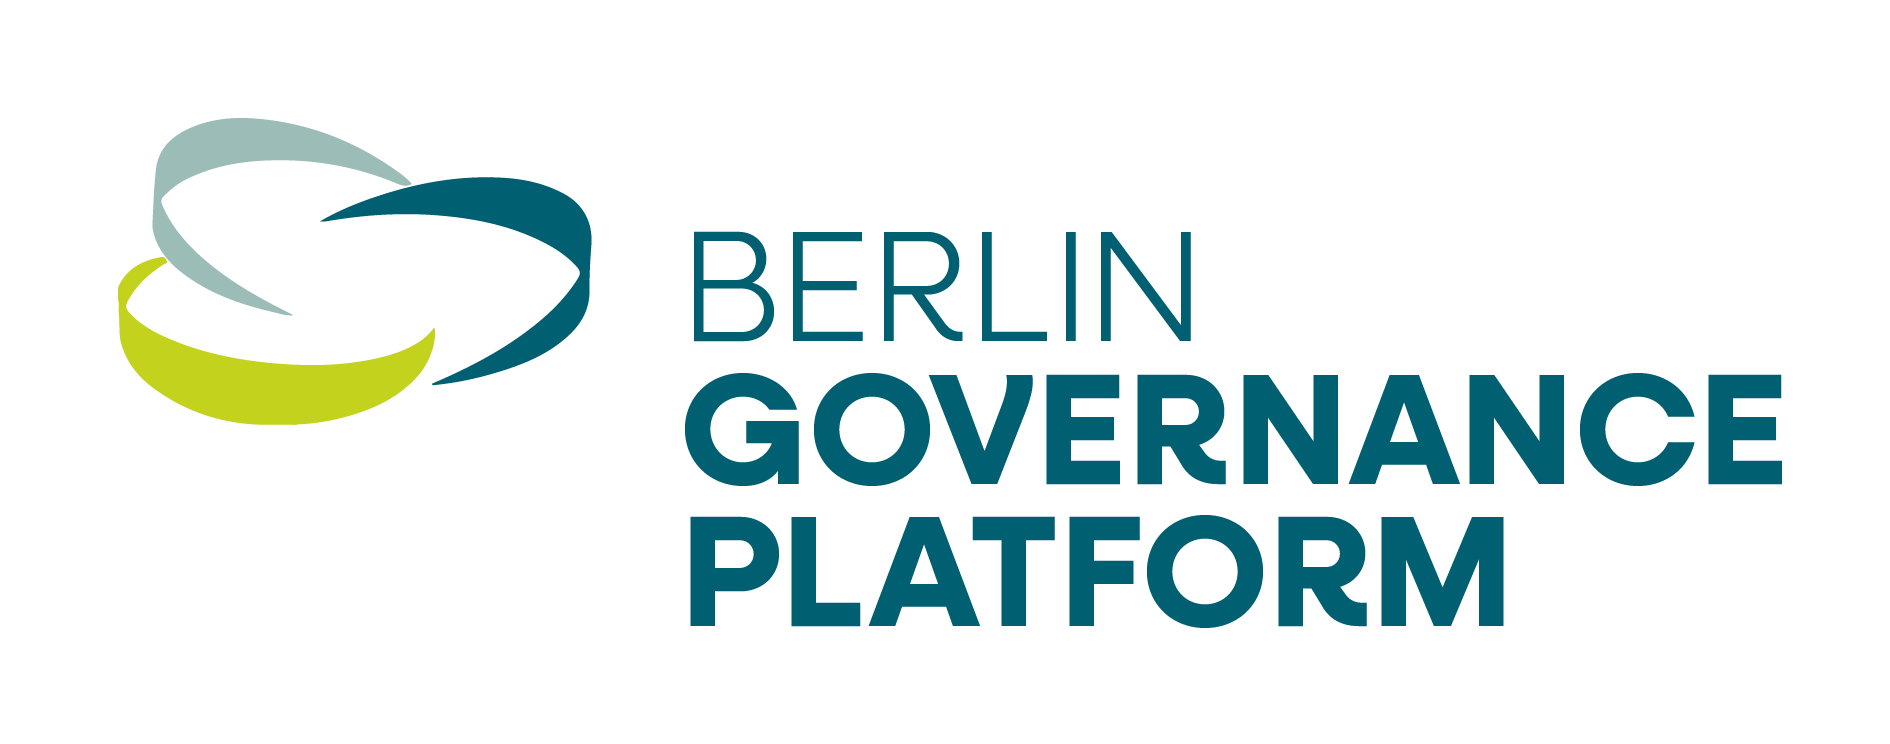 The logo of the Berlin Governance Platform in three colours including the SIGNET lettering. We work as a non-profit organisation in the service of promoting good governance, developing projects and concepts. We create spaces for all those who want to help shape a just and sustainable future.